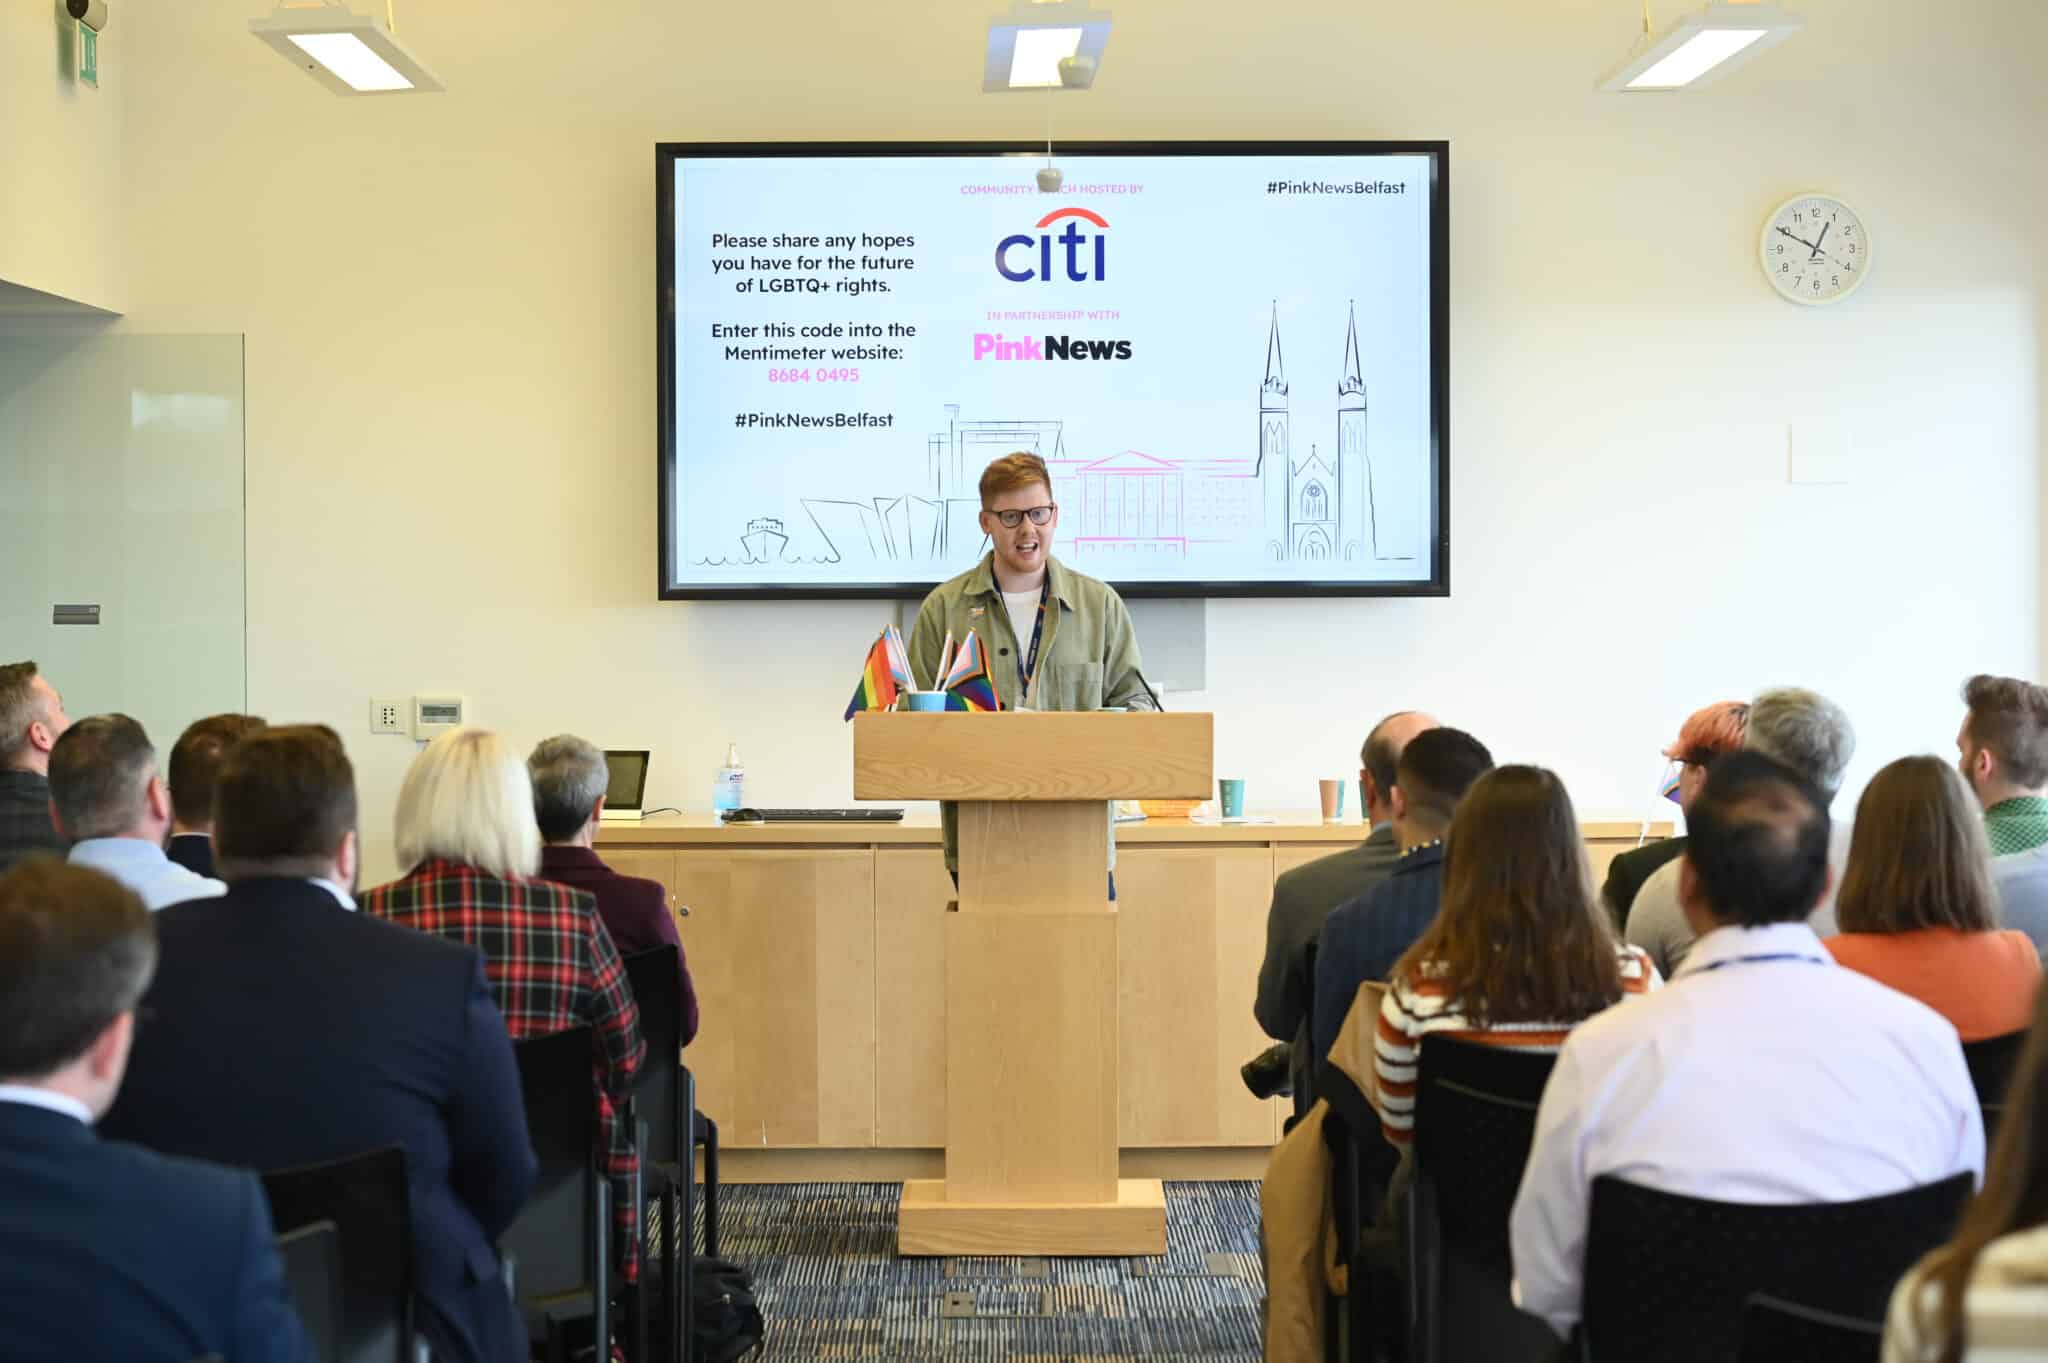 Citi's Odhrán Devlin at a community luncheon hosted by Citi in partnership with PinkNews.